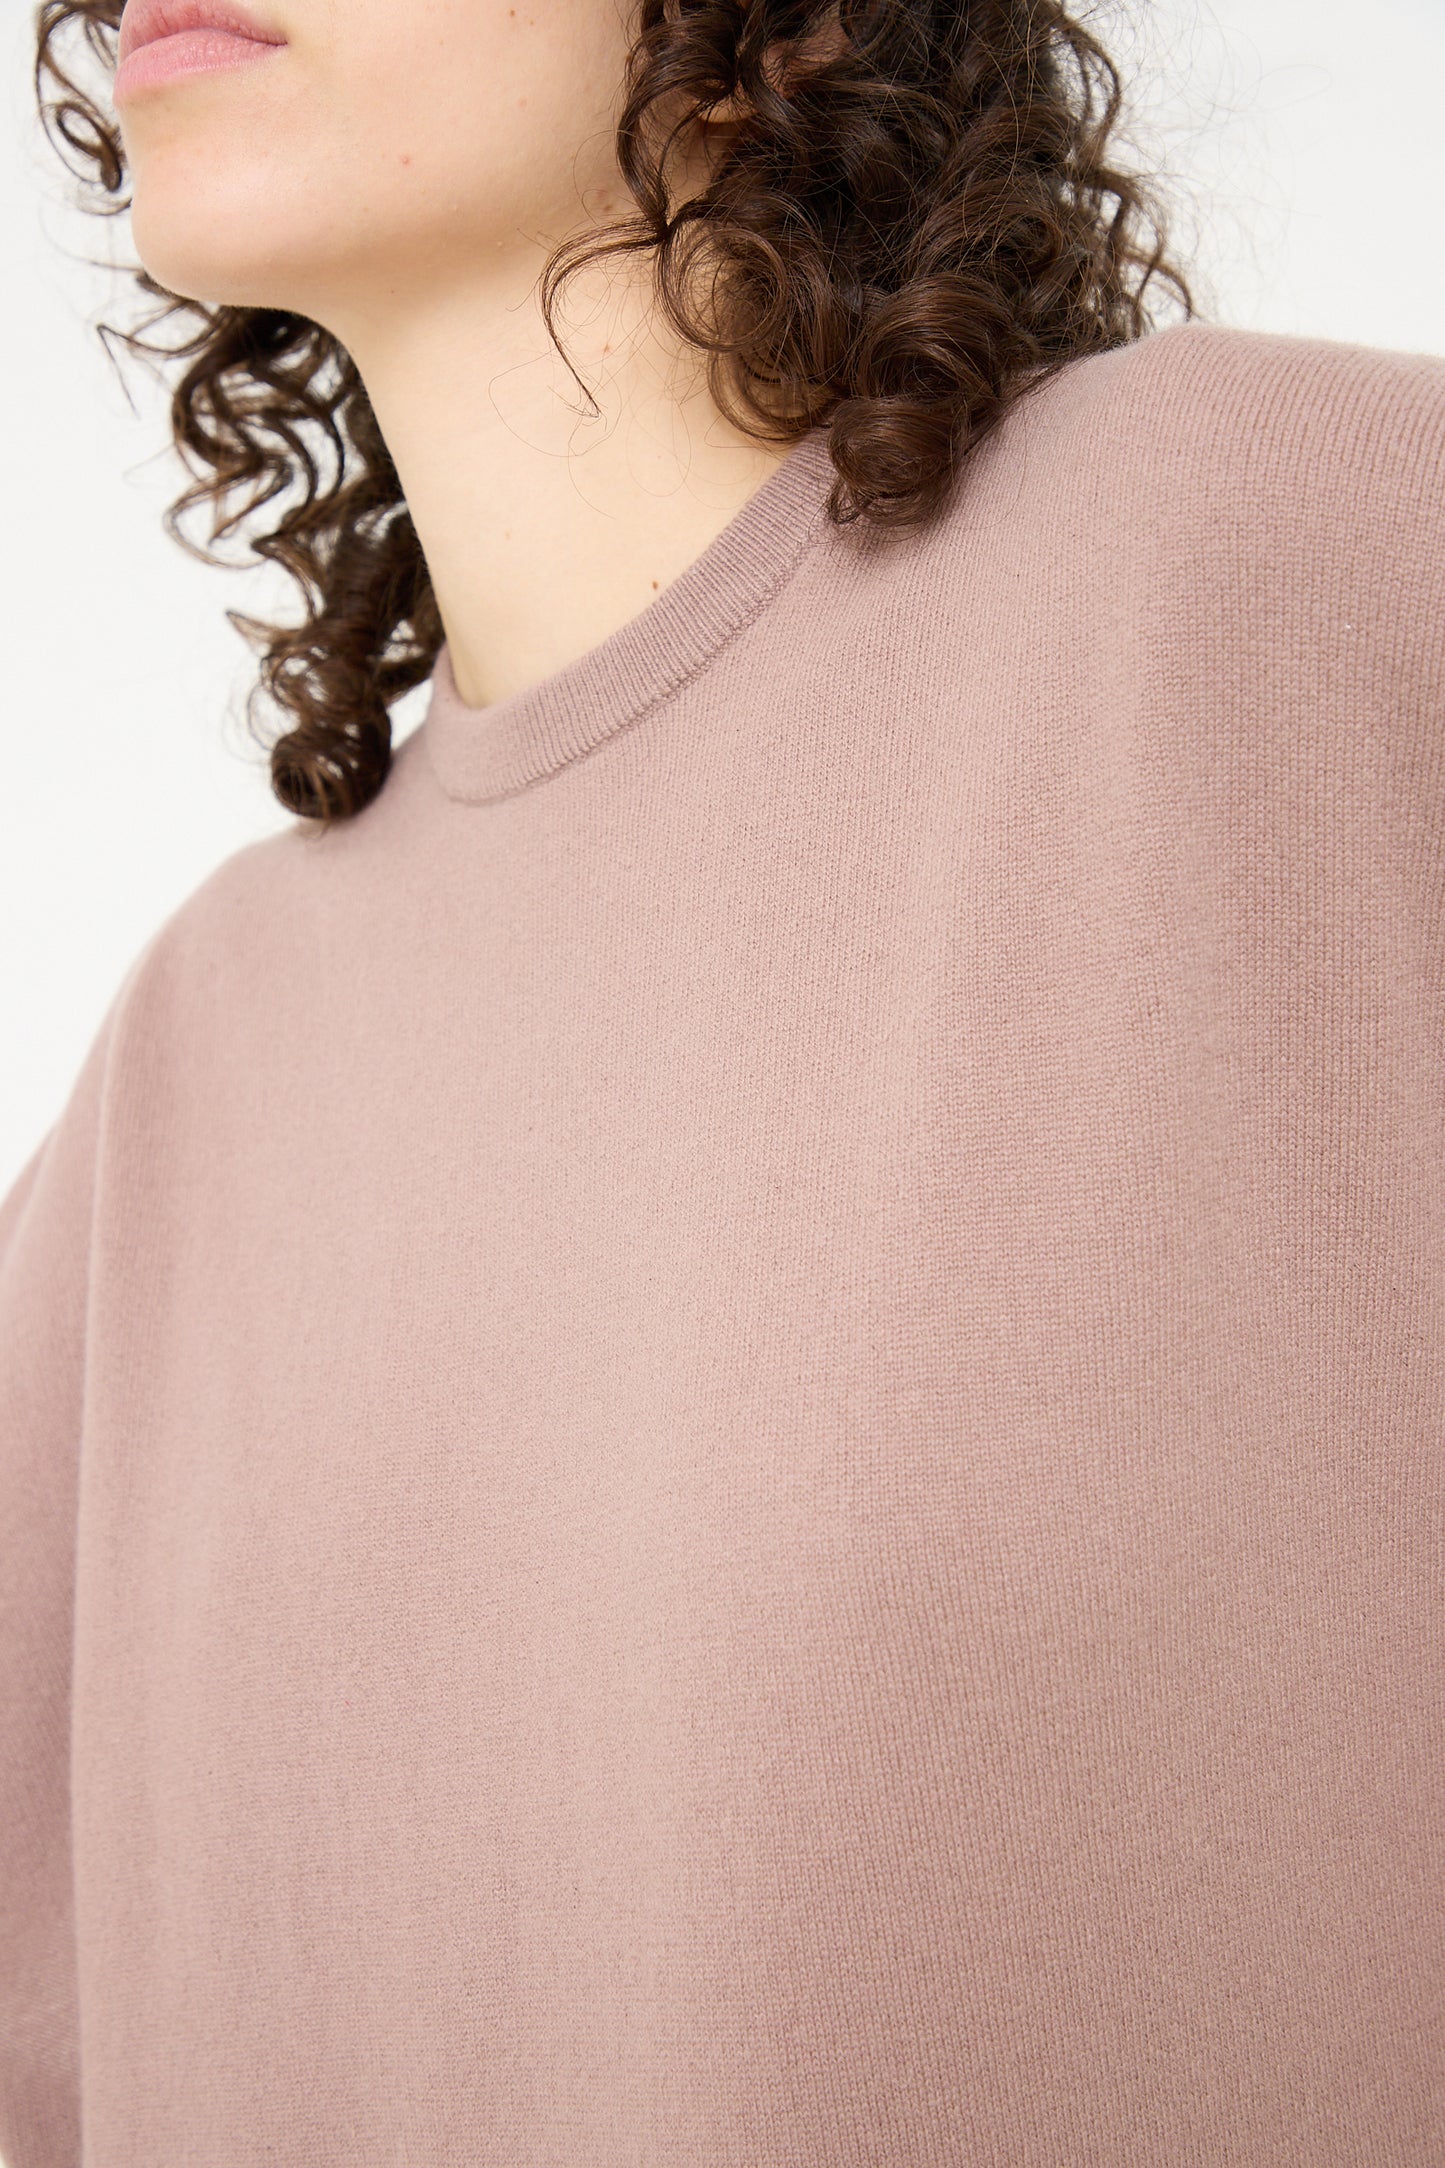 The model is wearing a pink Extreme Cashmere cashmere sweater with curly hair.